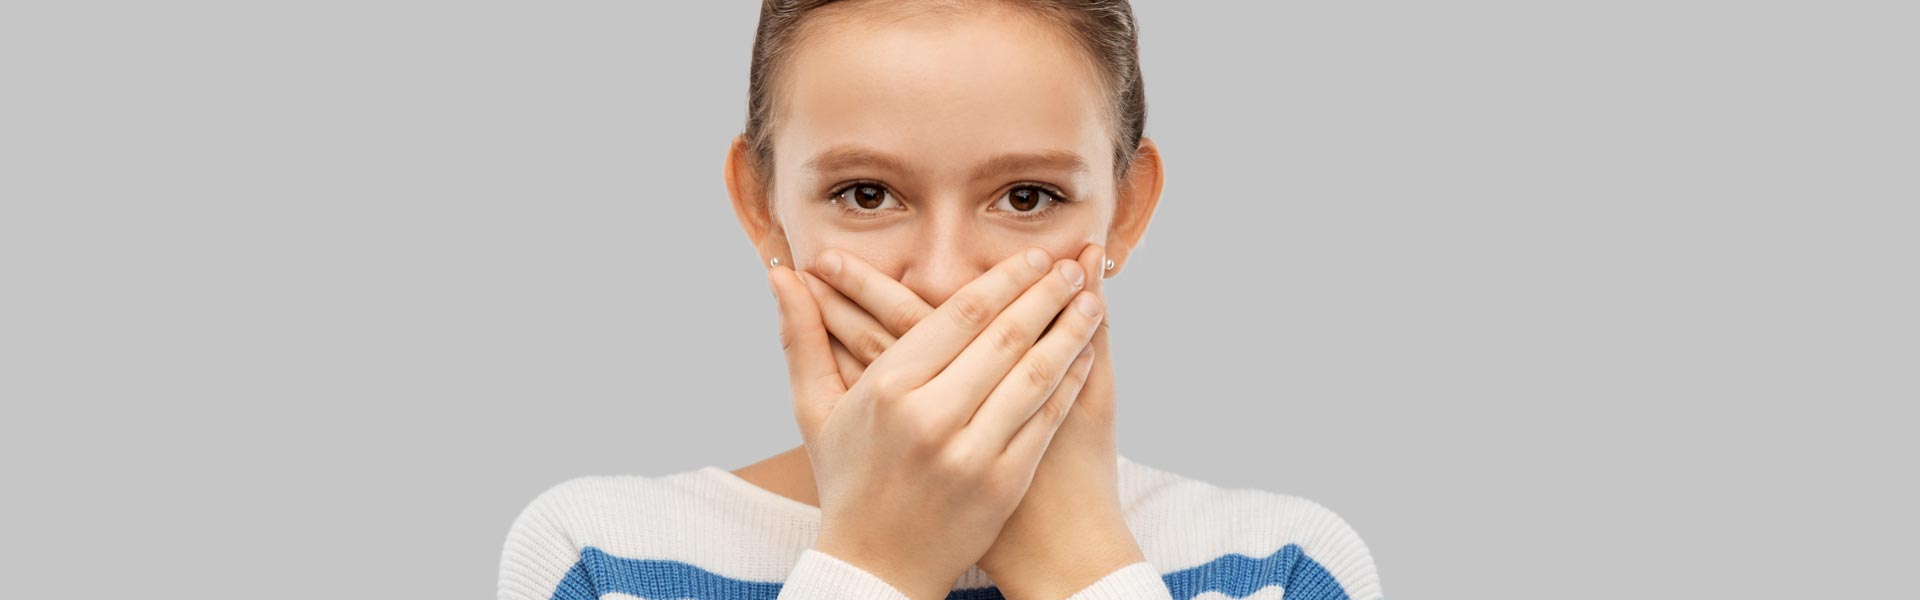 A girl closing her mouth with hands